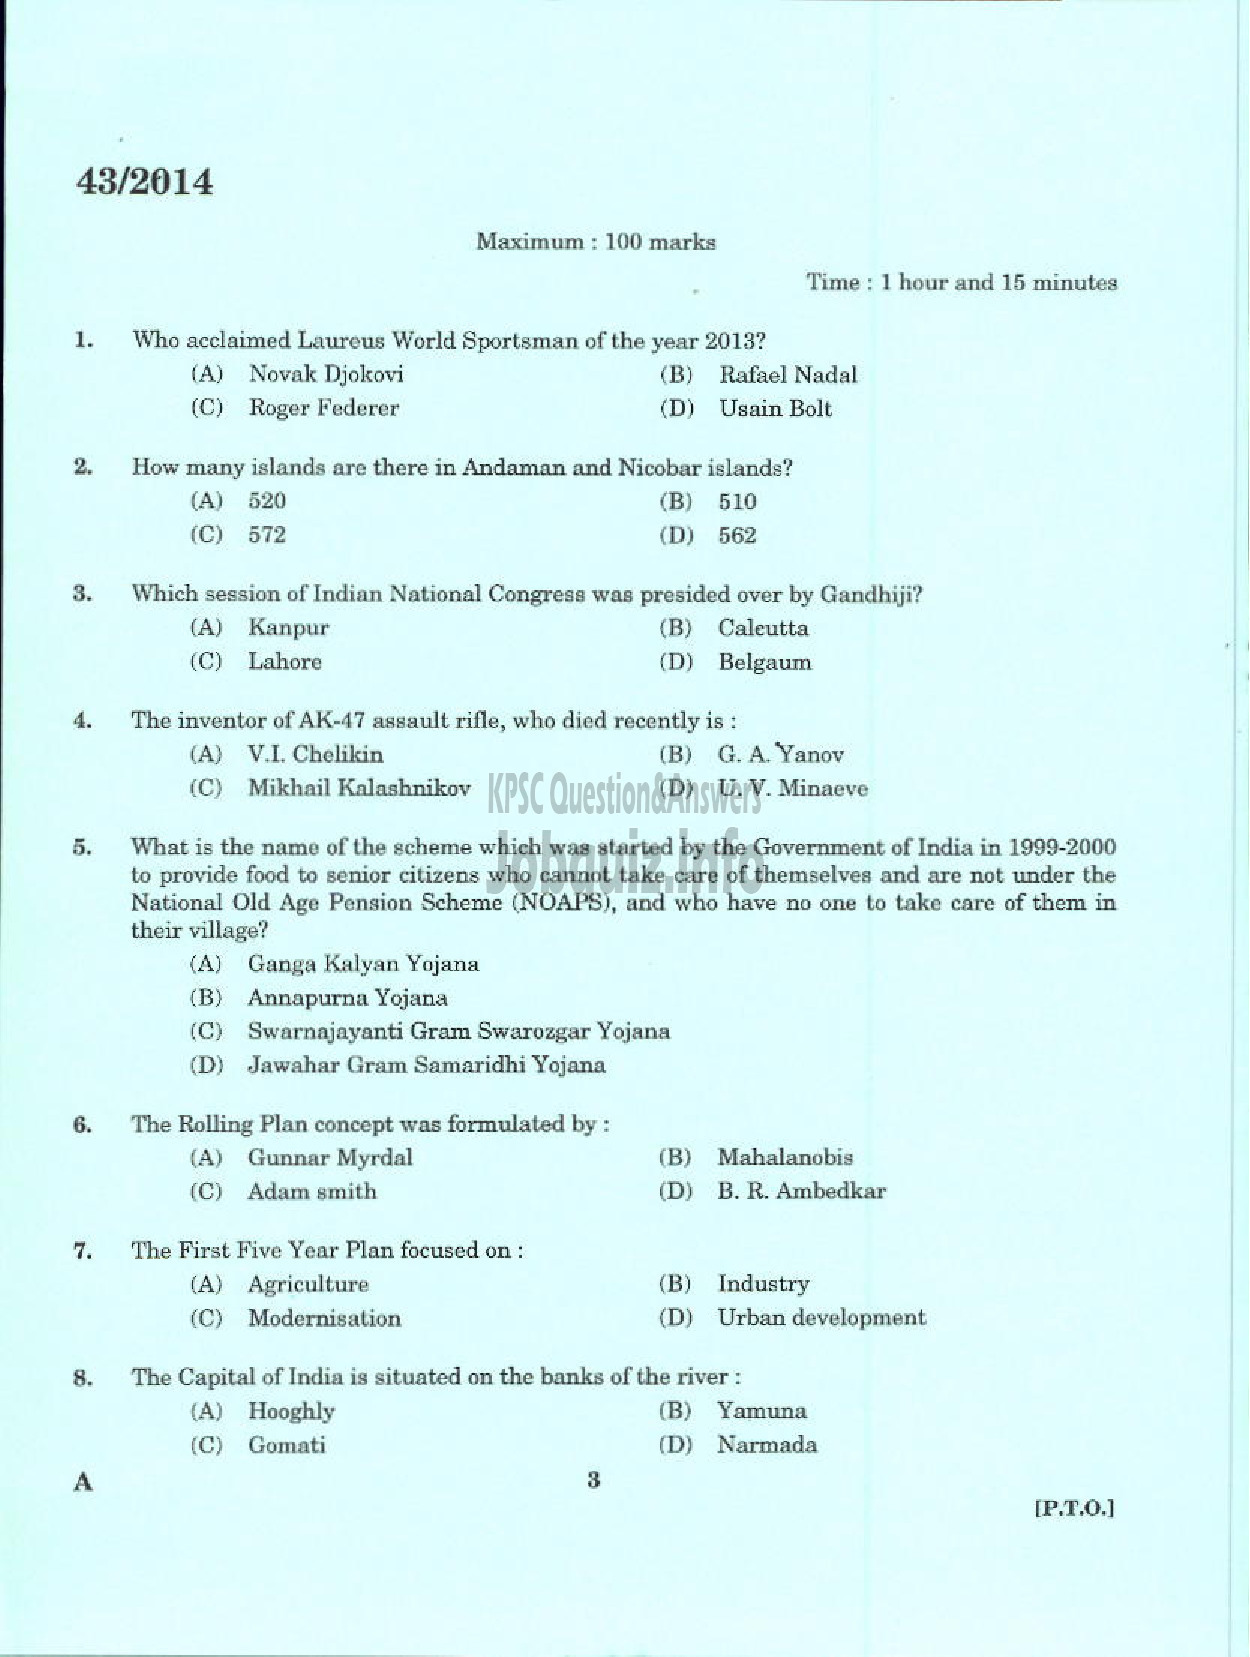 Kerala PSC Question Paper - DEPUTY GENERAL MANAGER DCB IDKY AND KSGD PART I AND PART II-1